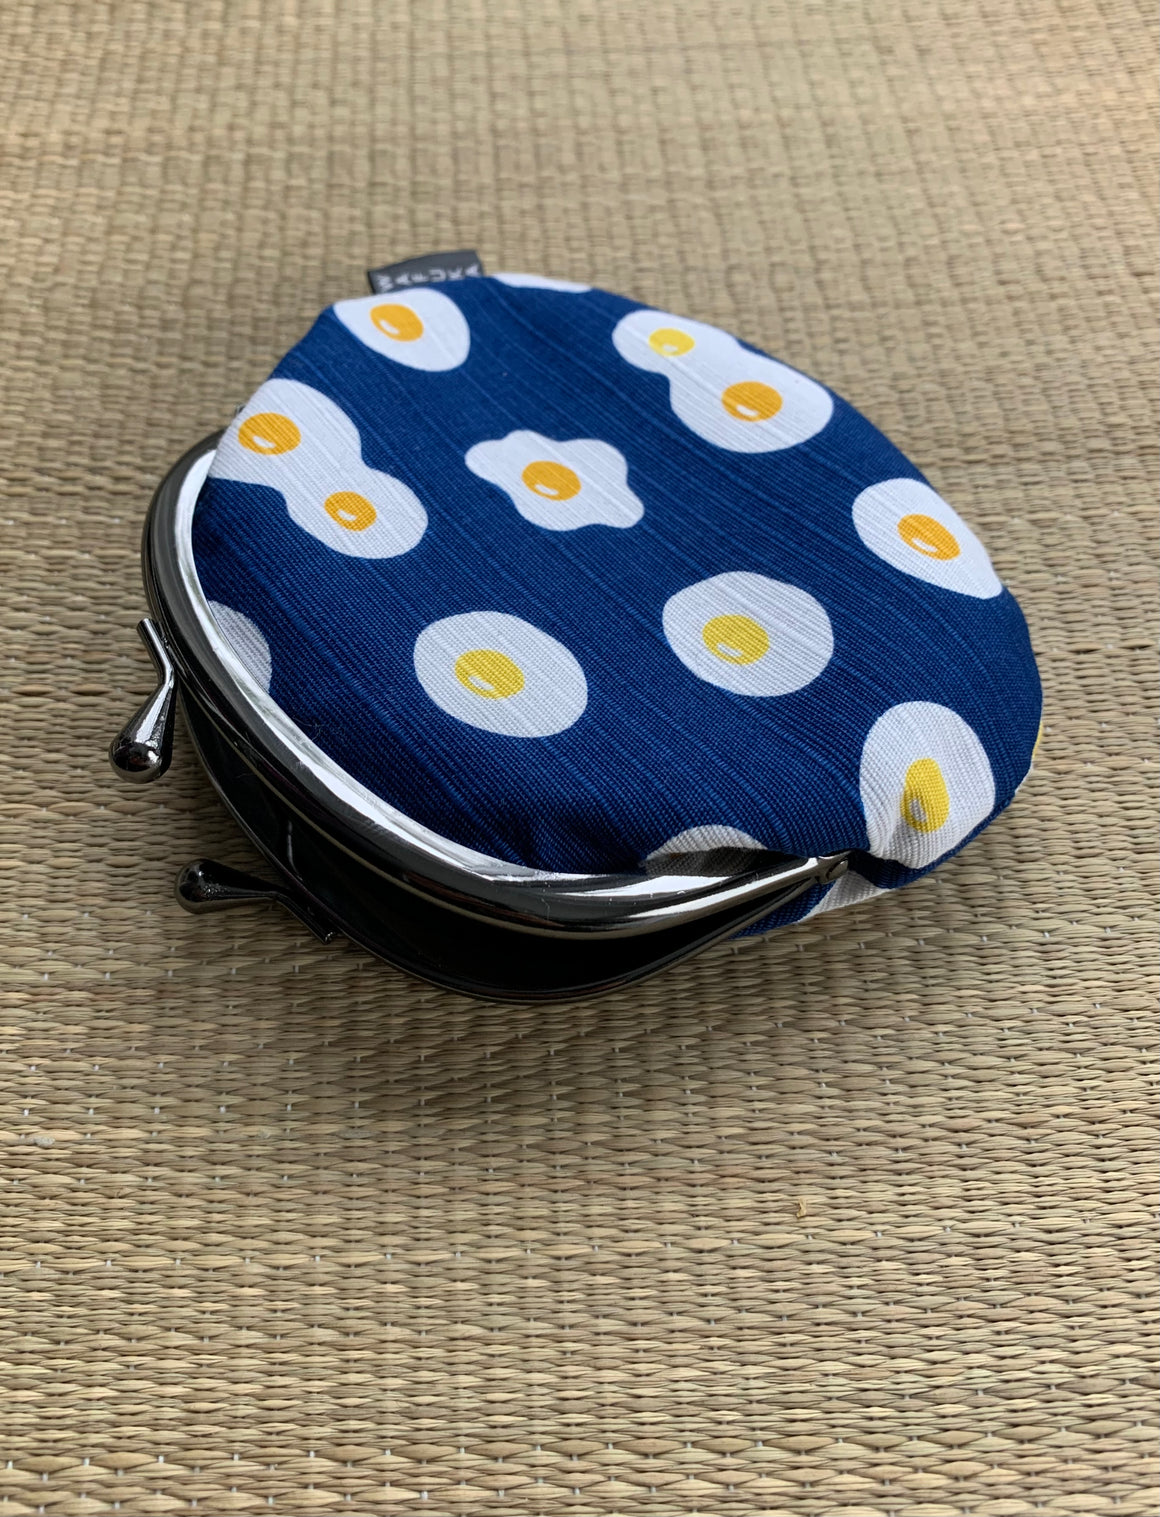 Sunny Side up egg coin purse